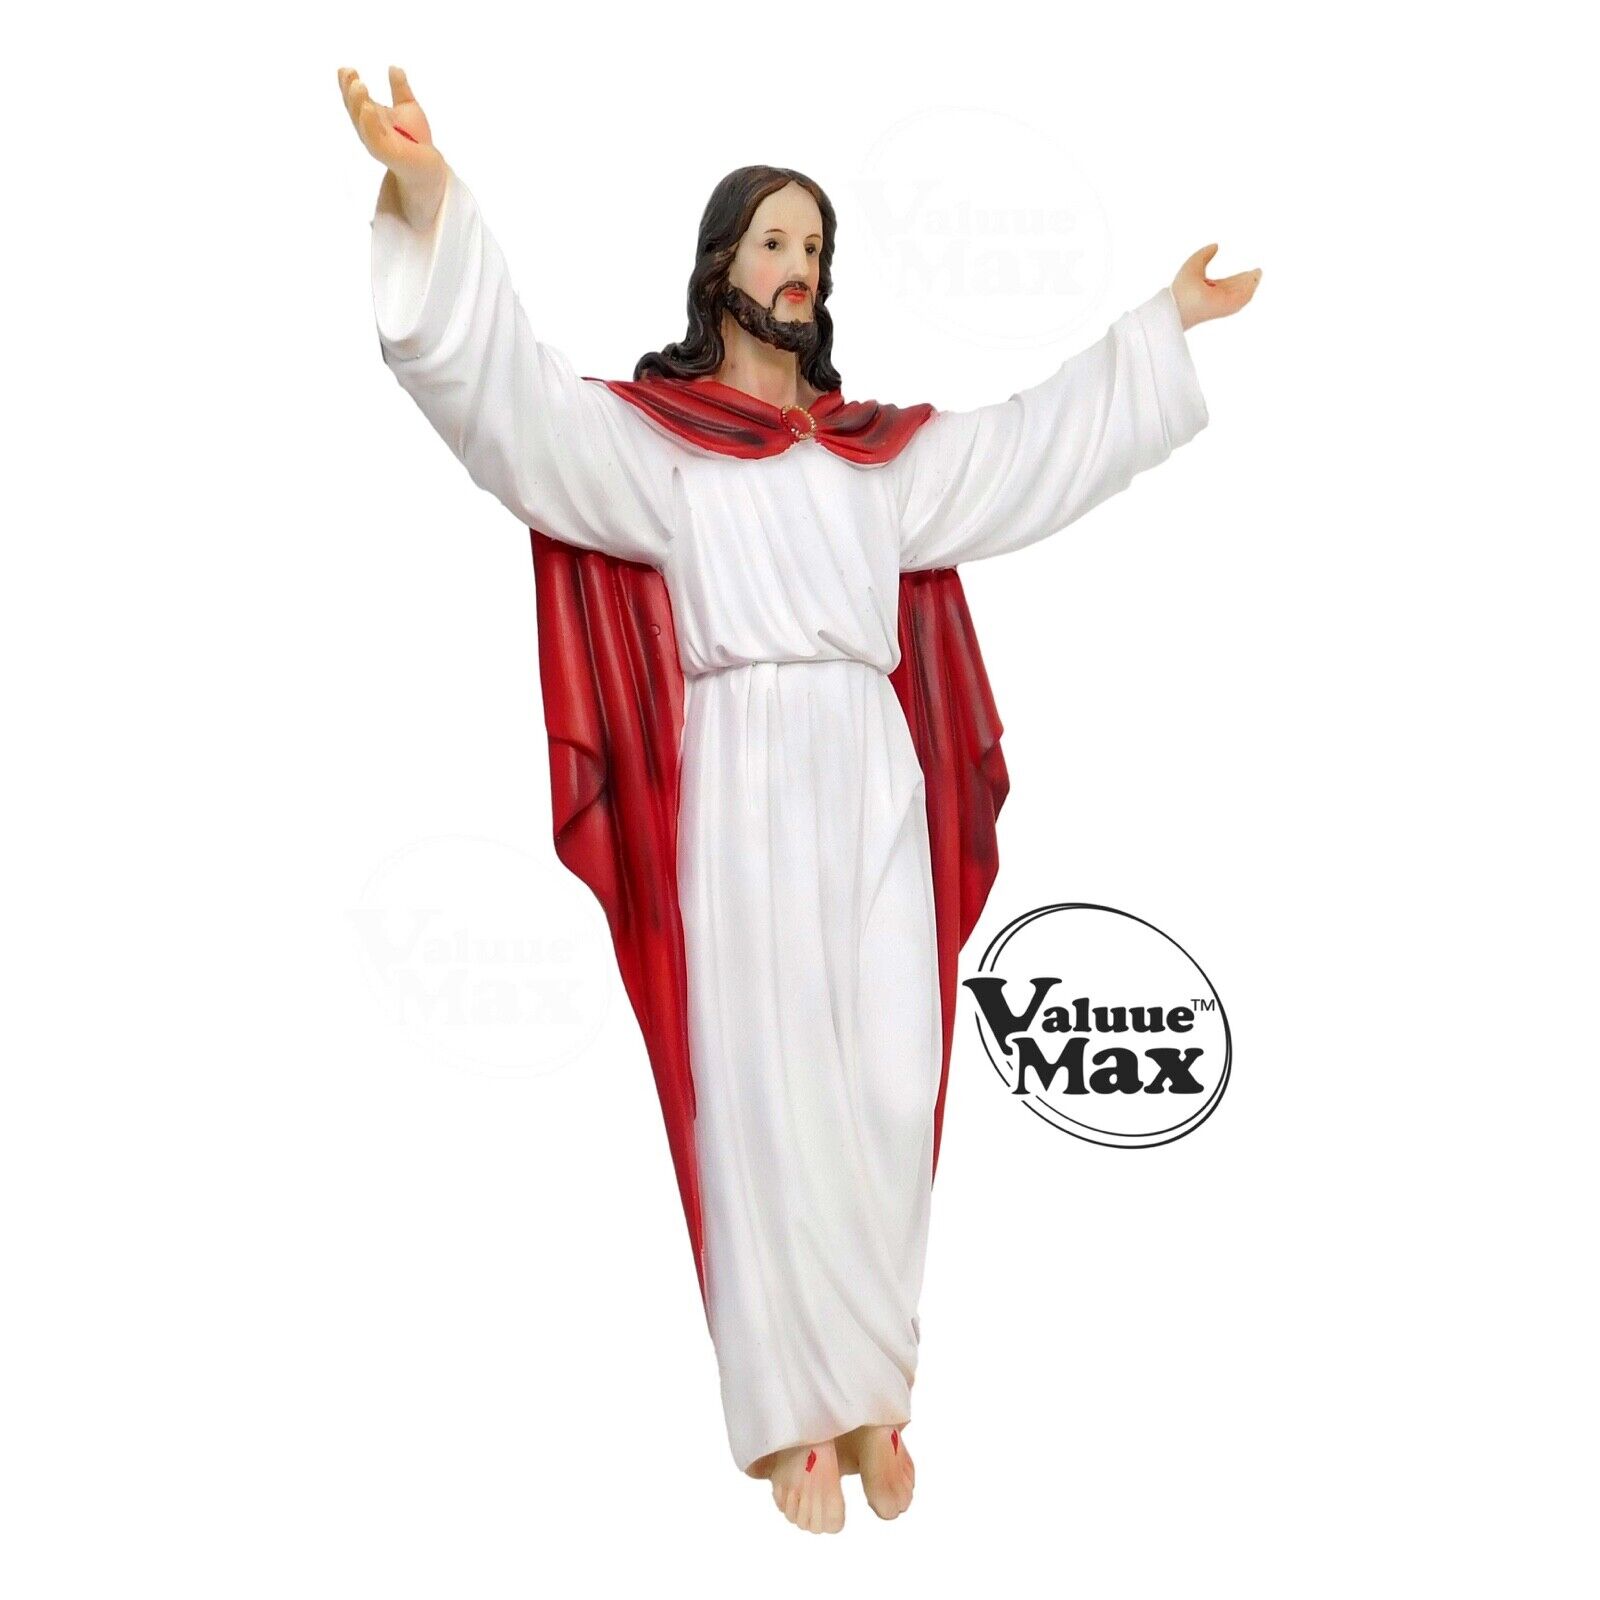 Risen Jesus Statue, Finely Detailed Resin, 16 Inch Tall, Wall Mounting Figurine